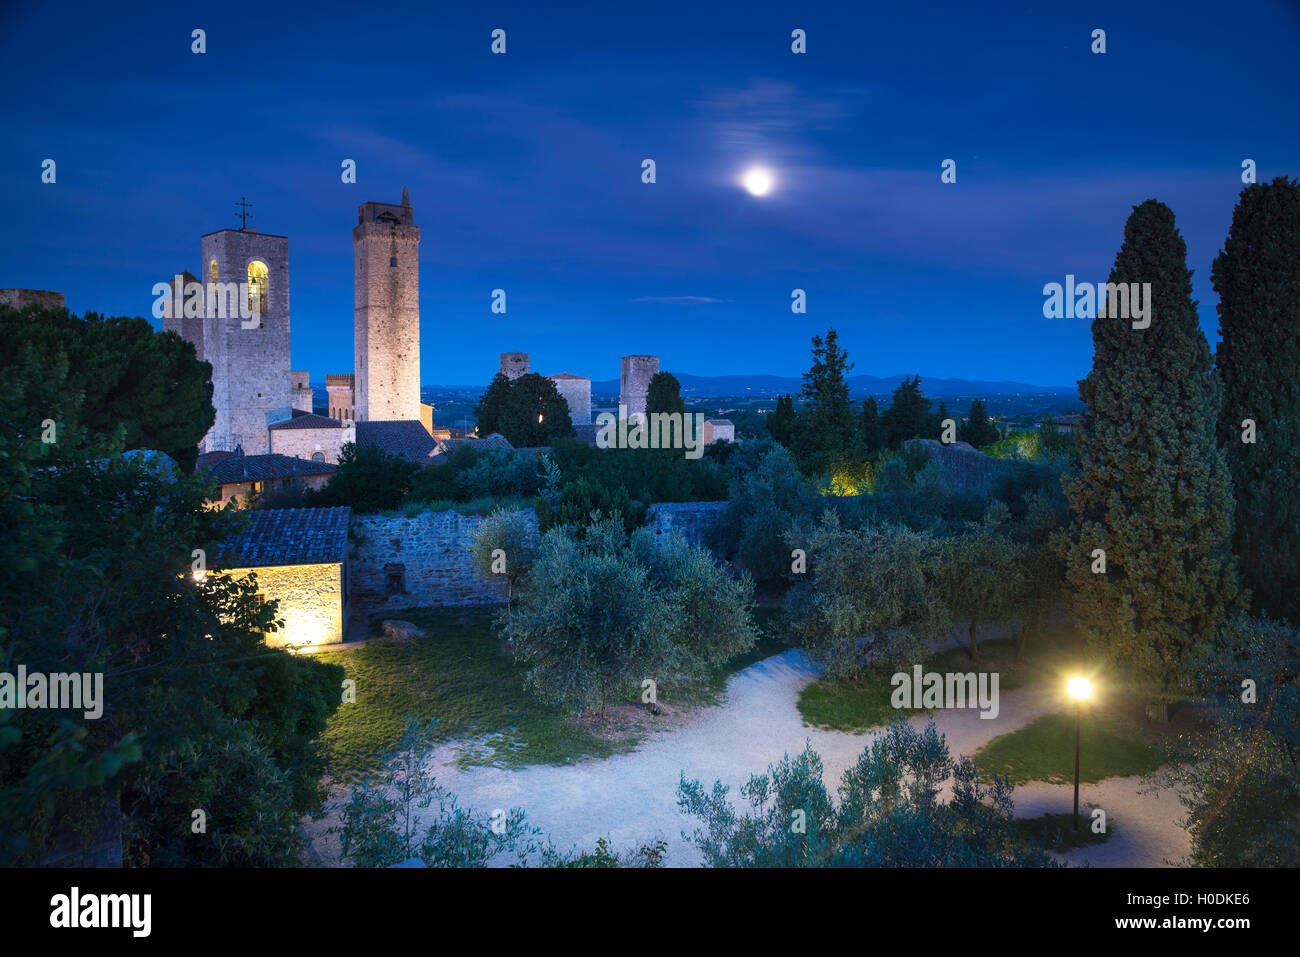 San Gimignano on night, medieval town landmark. Moon light on towers and park with cypress and olive trees. Tuscany, Italy, Euro Stock Photo